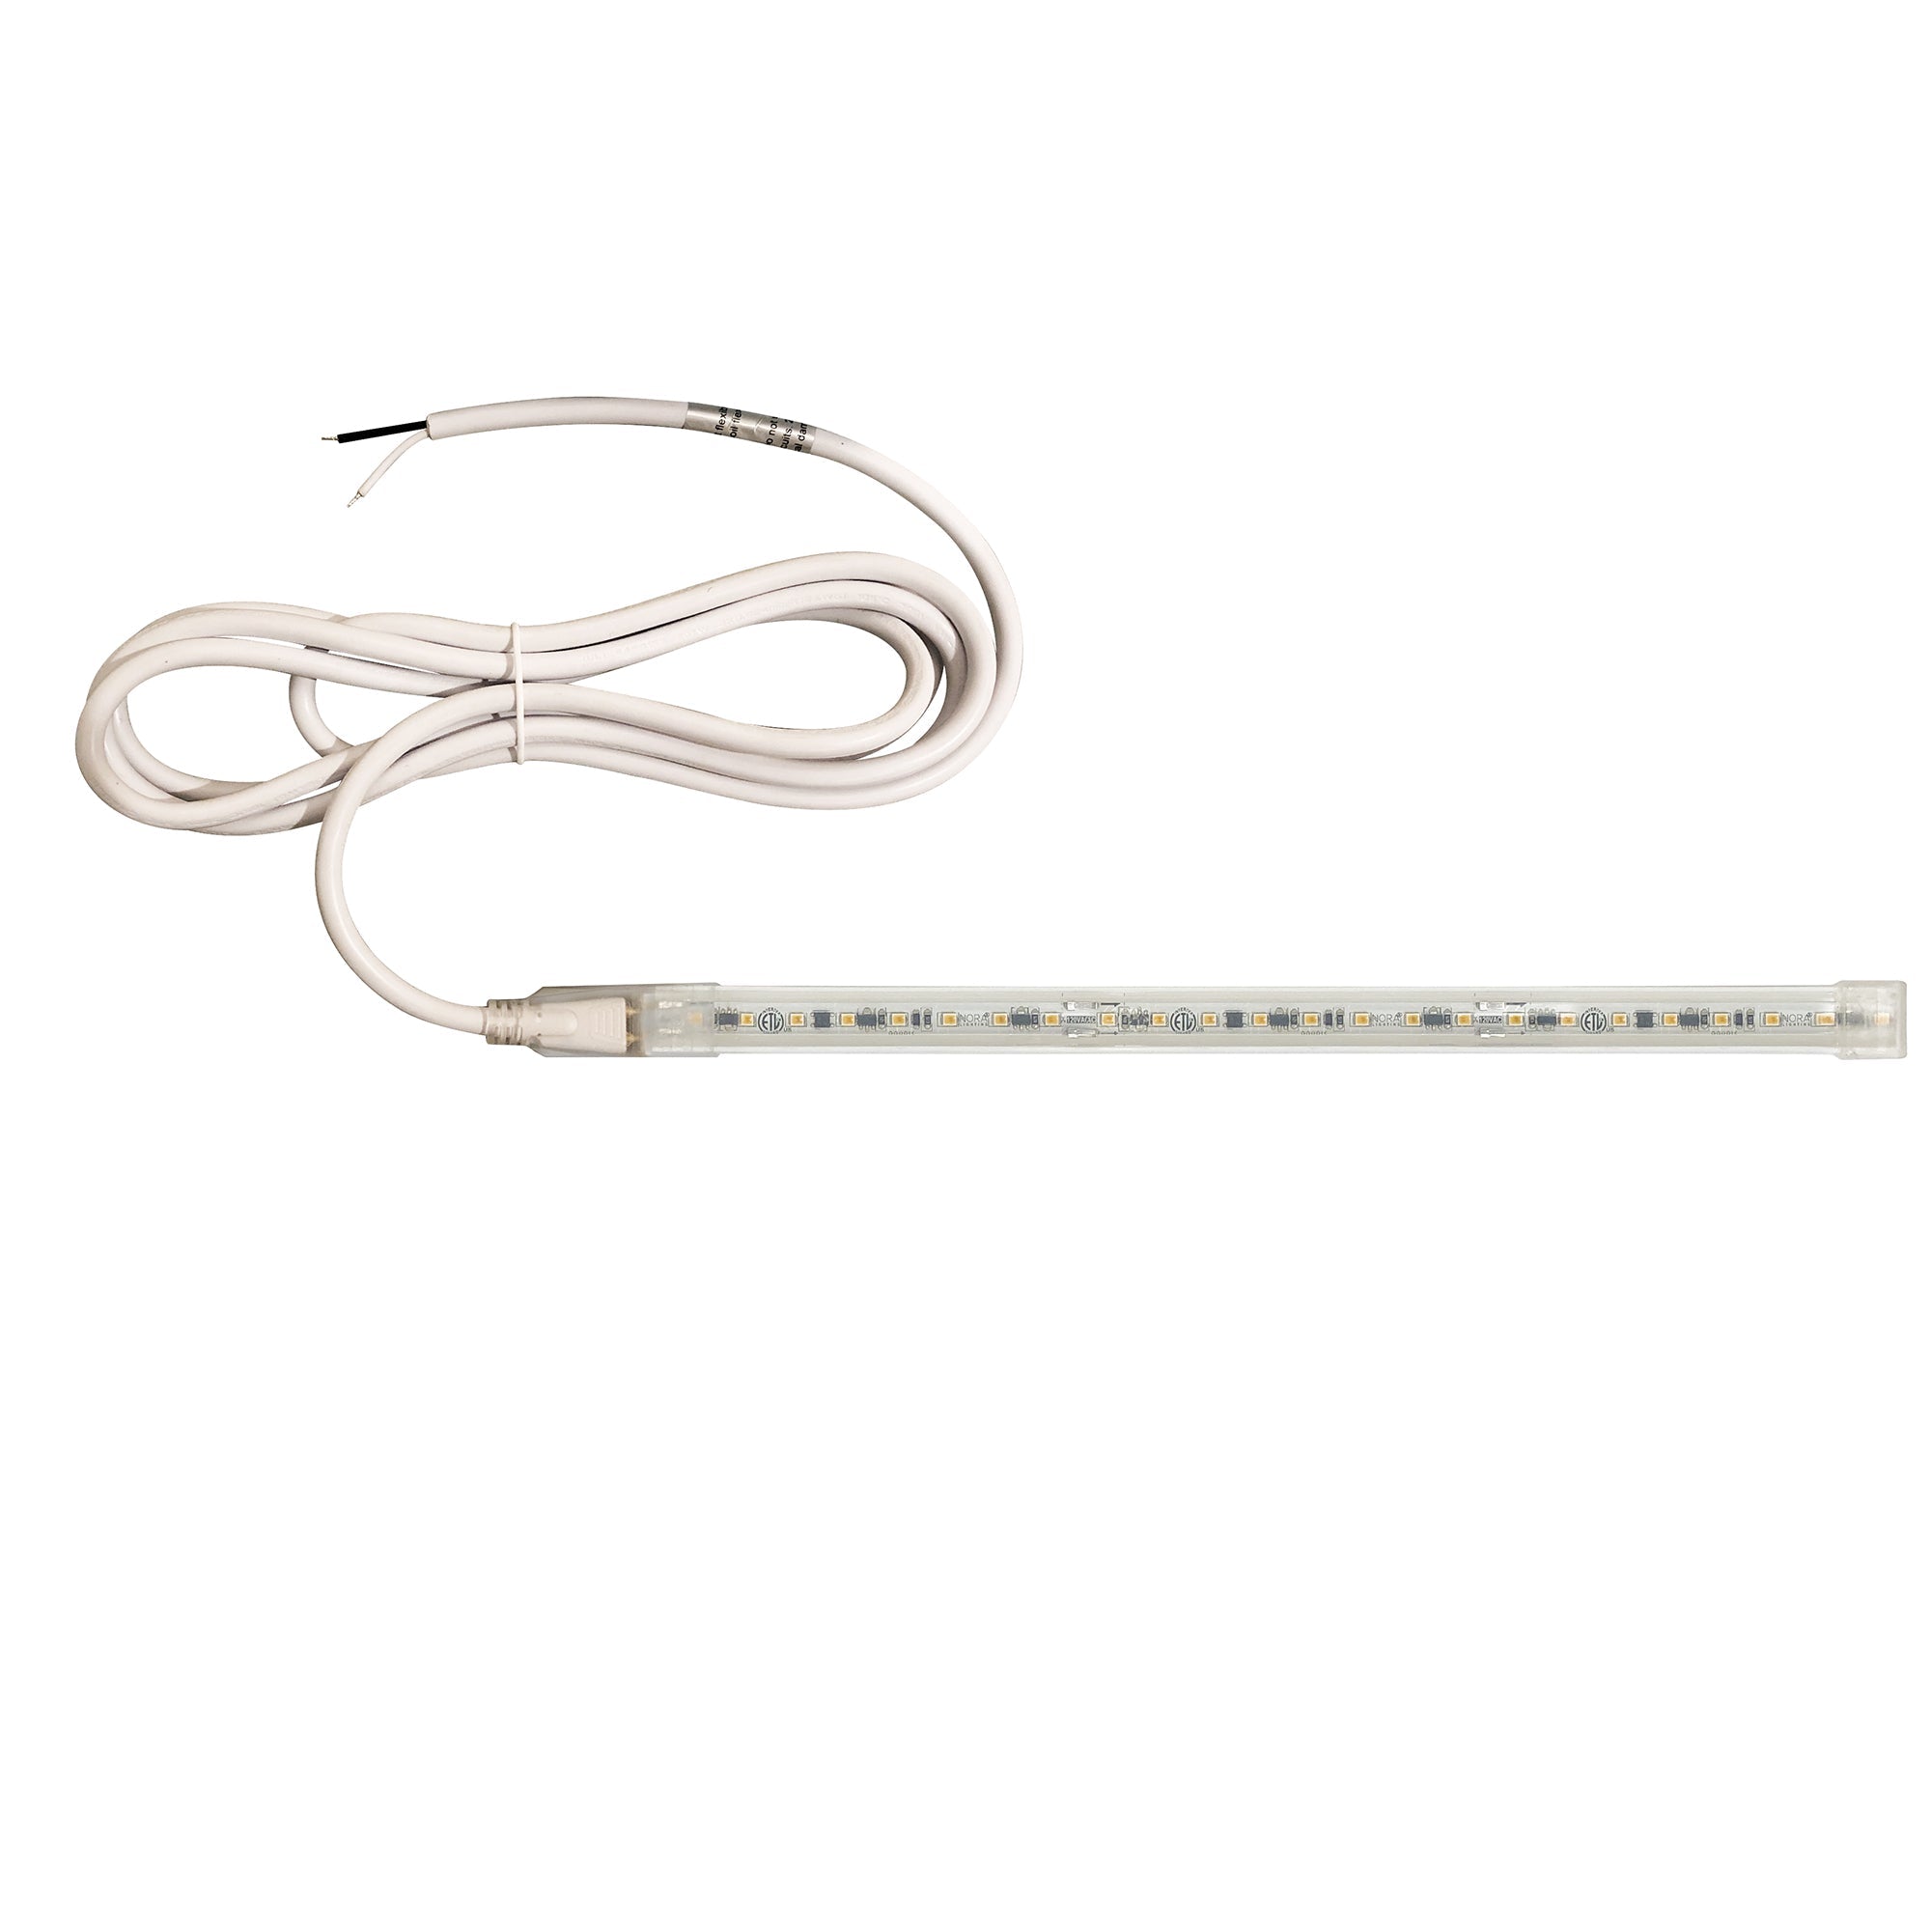 Nora Lighting NUTP13-W53-12-940/HW - Accent / Undercabinet - Custom Cut 53-ft 120V Continuous LED Tape Light, 330lm / 3.6W per foot, 4000K, w/ Mounting Clips and 8' Hardwired Power Cord